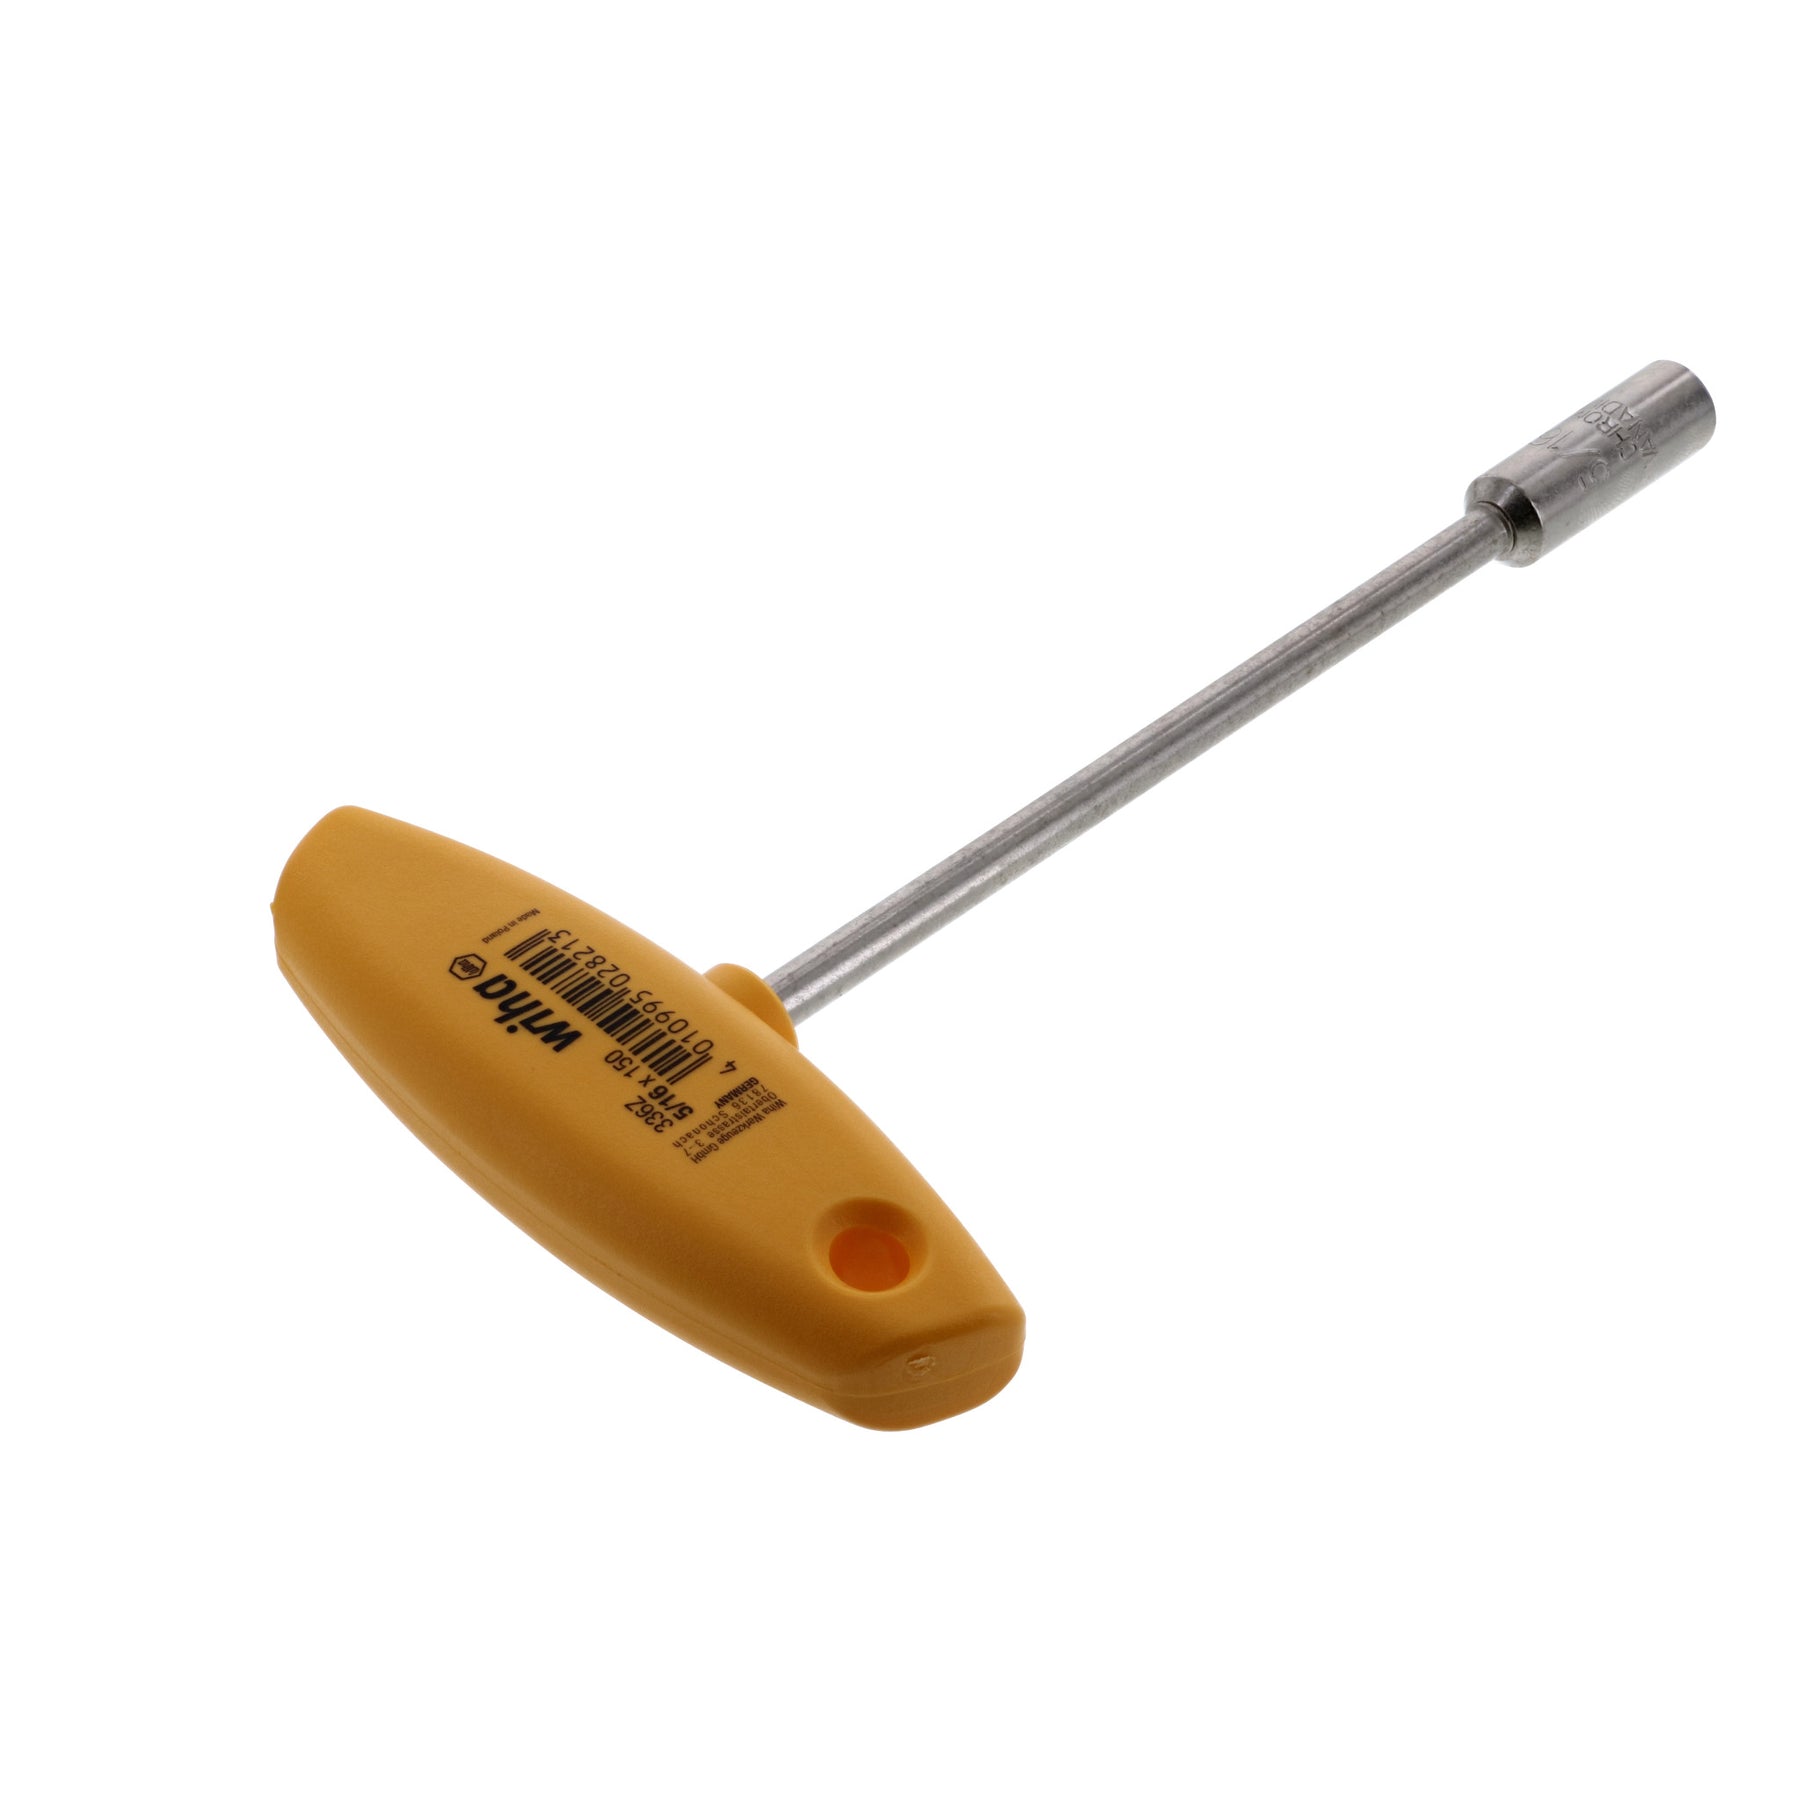 Classic Grip T-Handle Nut Driver 5/16"